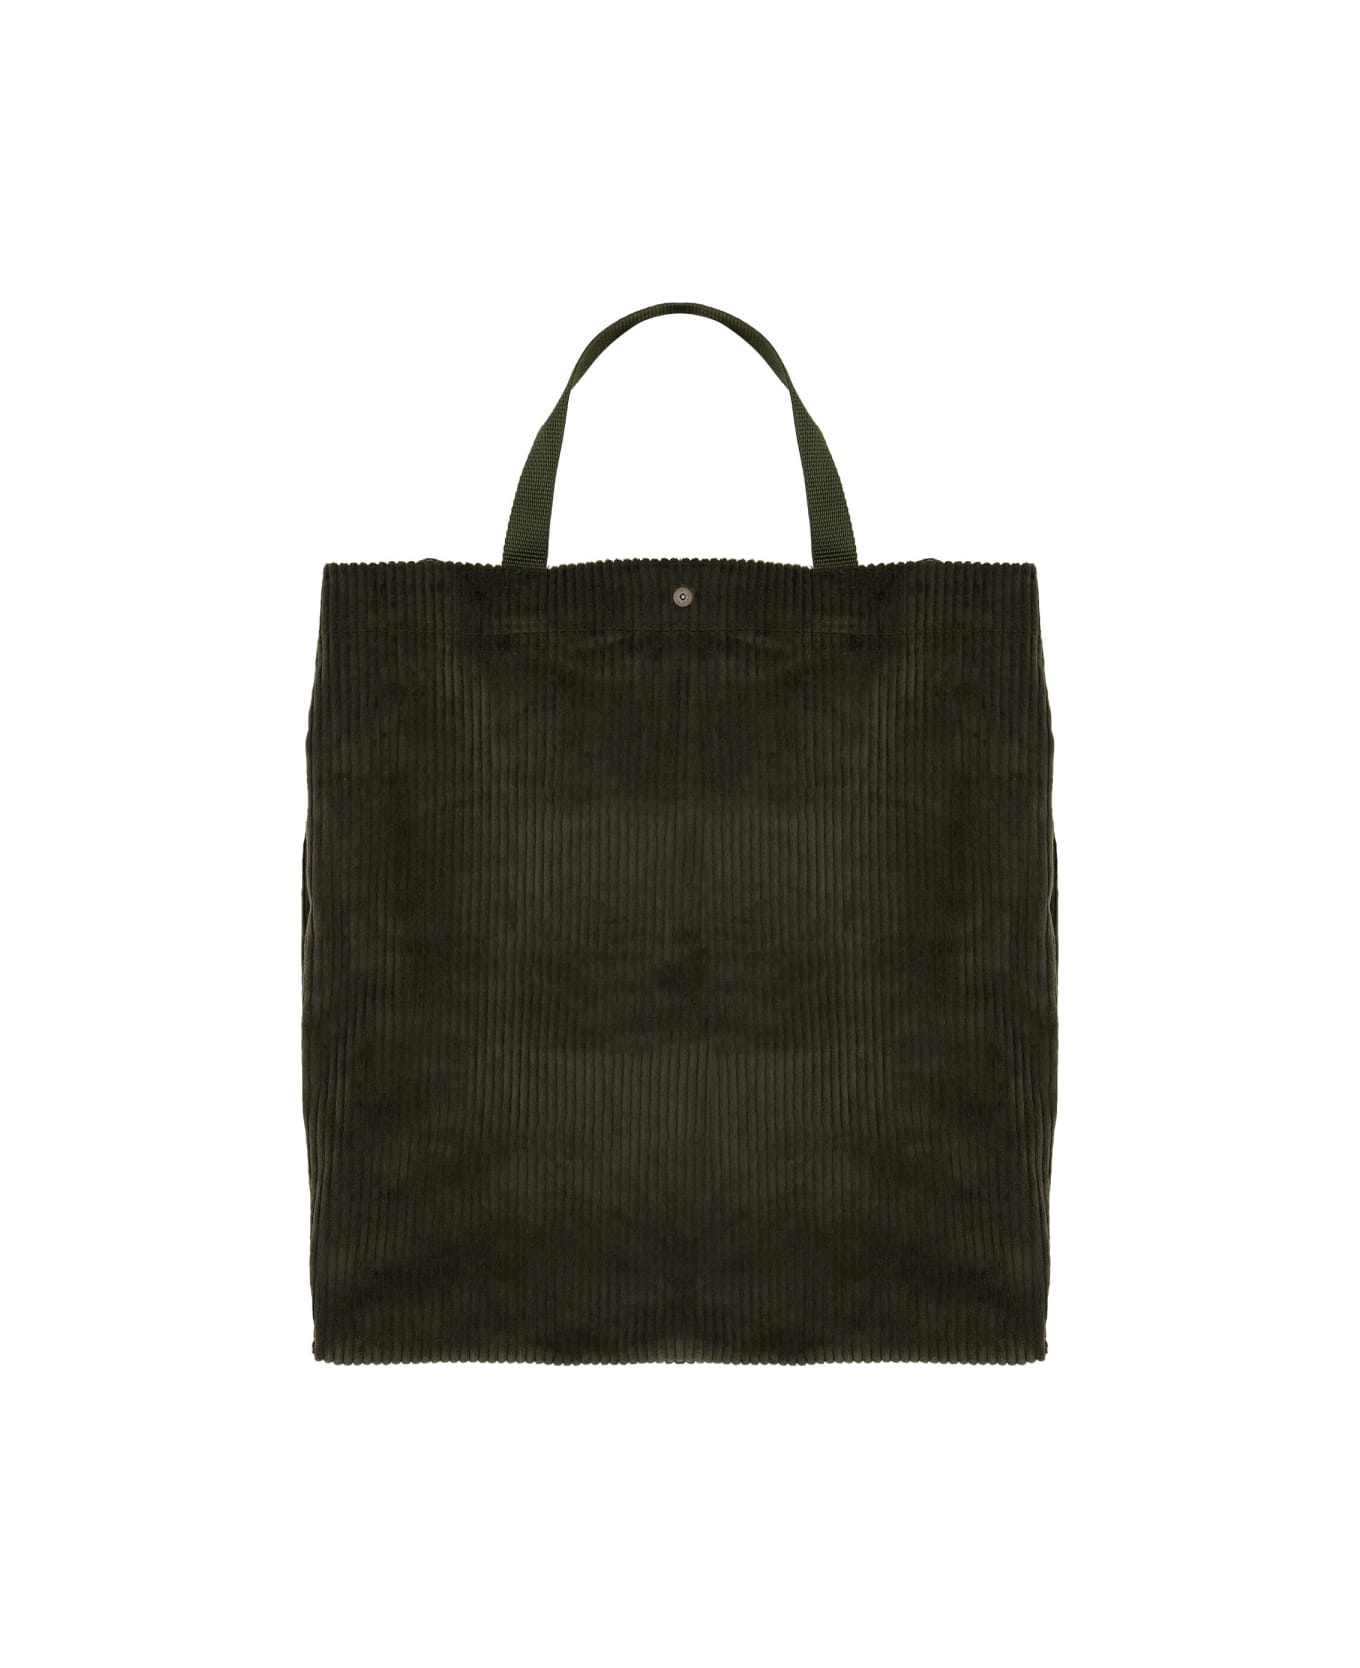 Engineered Garments "all Tote" Bag - GREEN トートバッグ